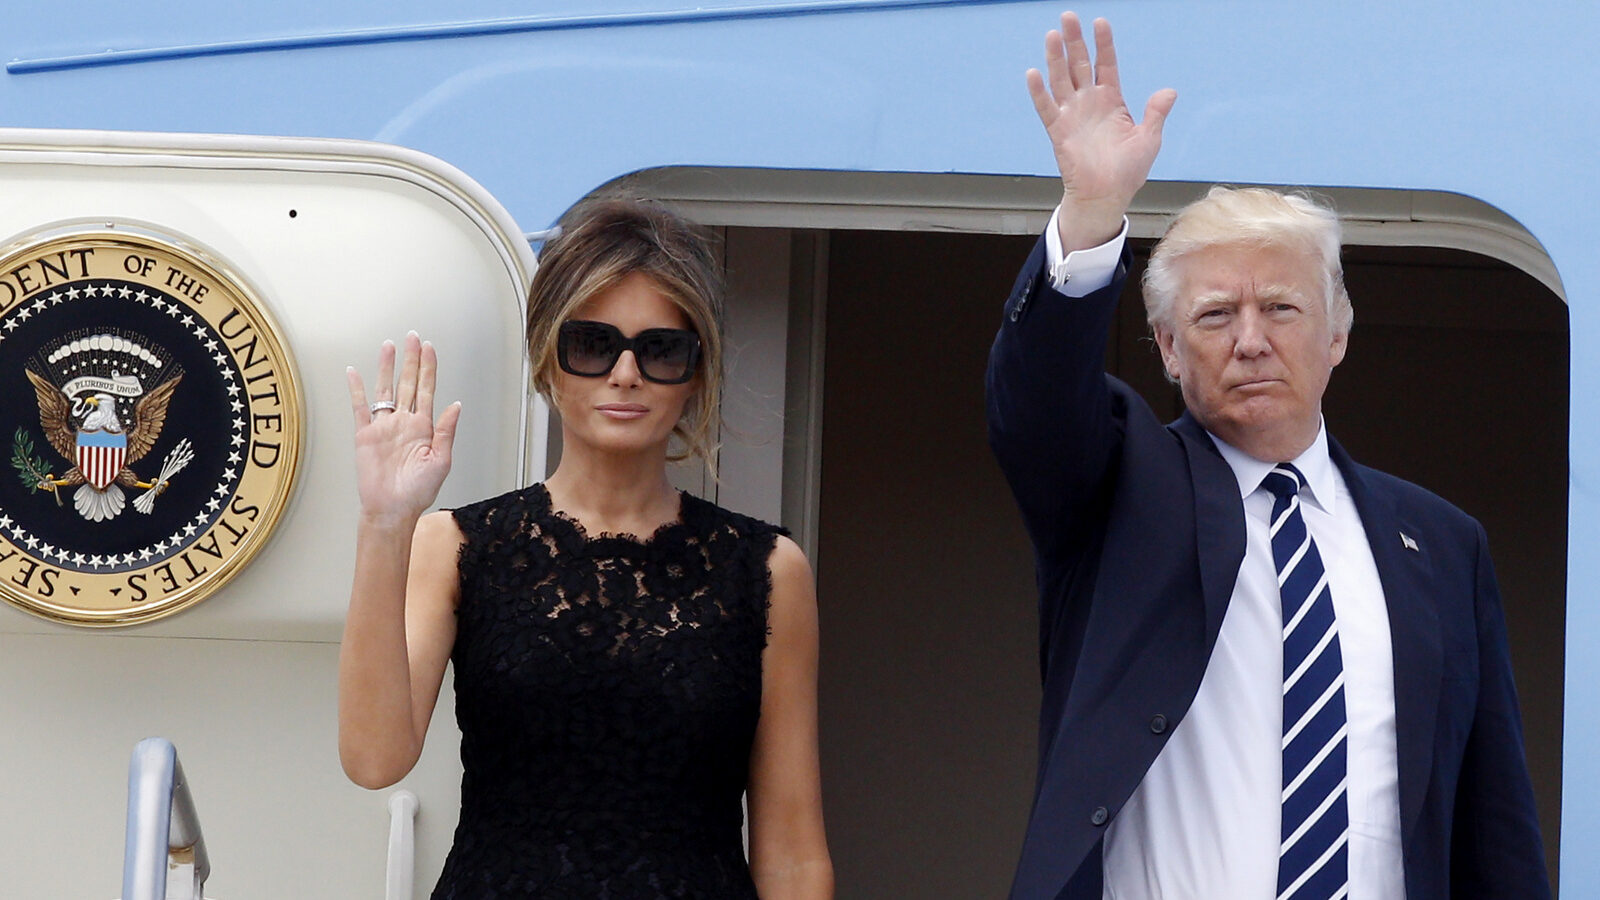 Donald and Melania Trump wave to reporters before boarding the Air Force One to Brussels, at the end of a 2-day visit to Italy, May 24, 2017. (AP/Riccardo De Luca)